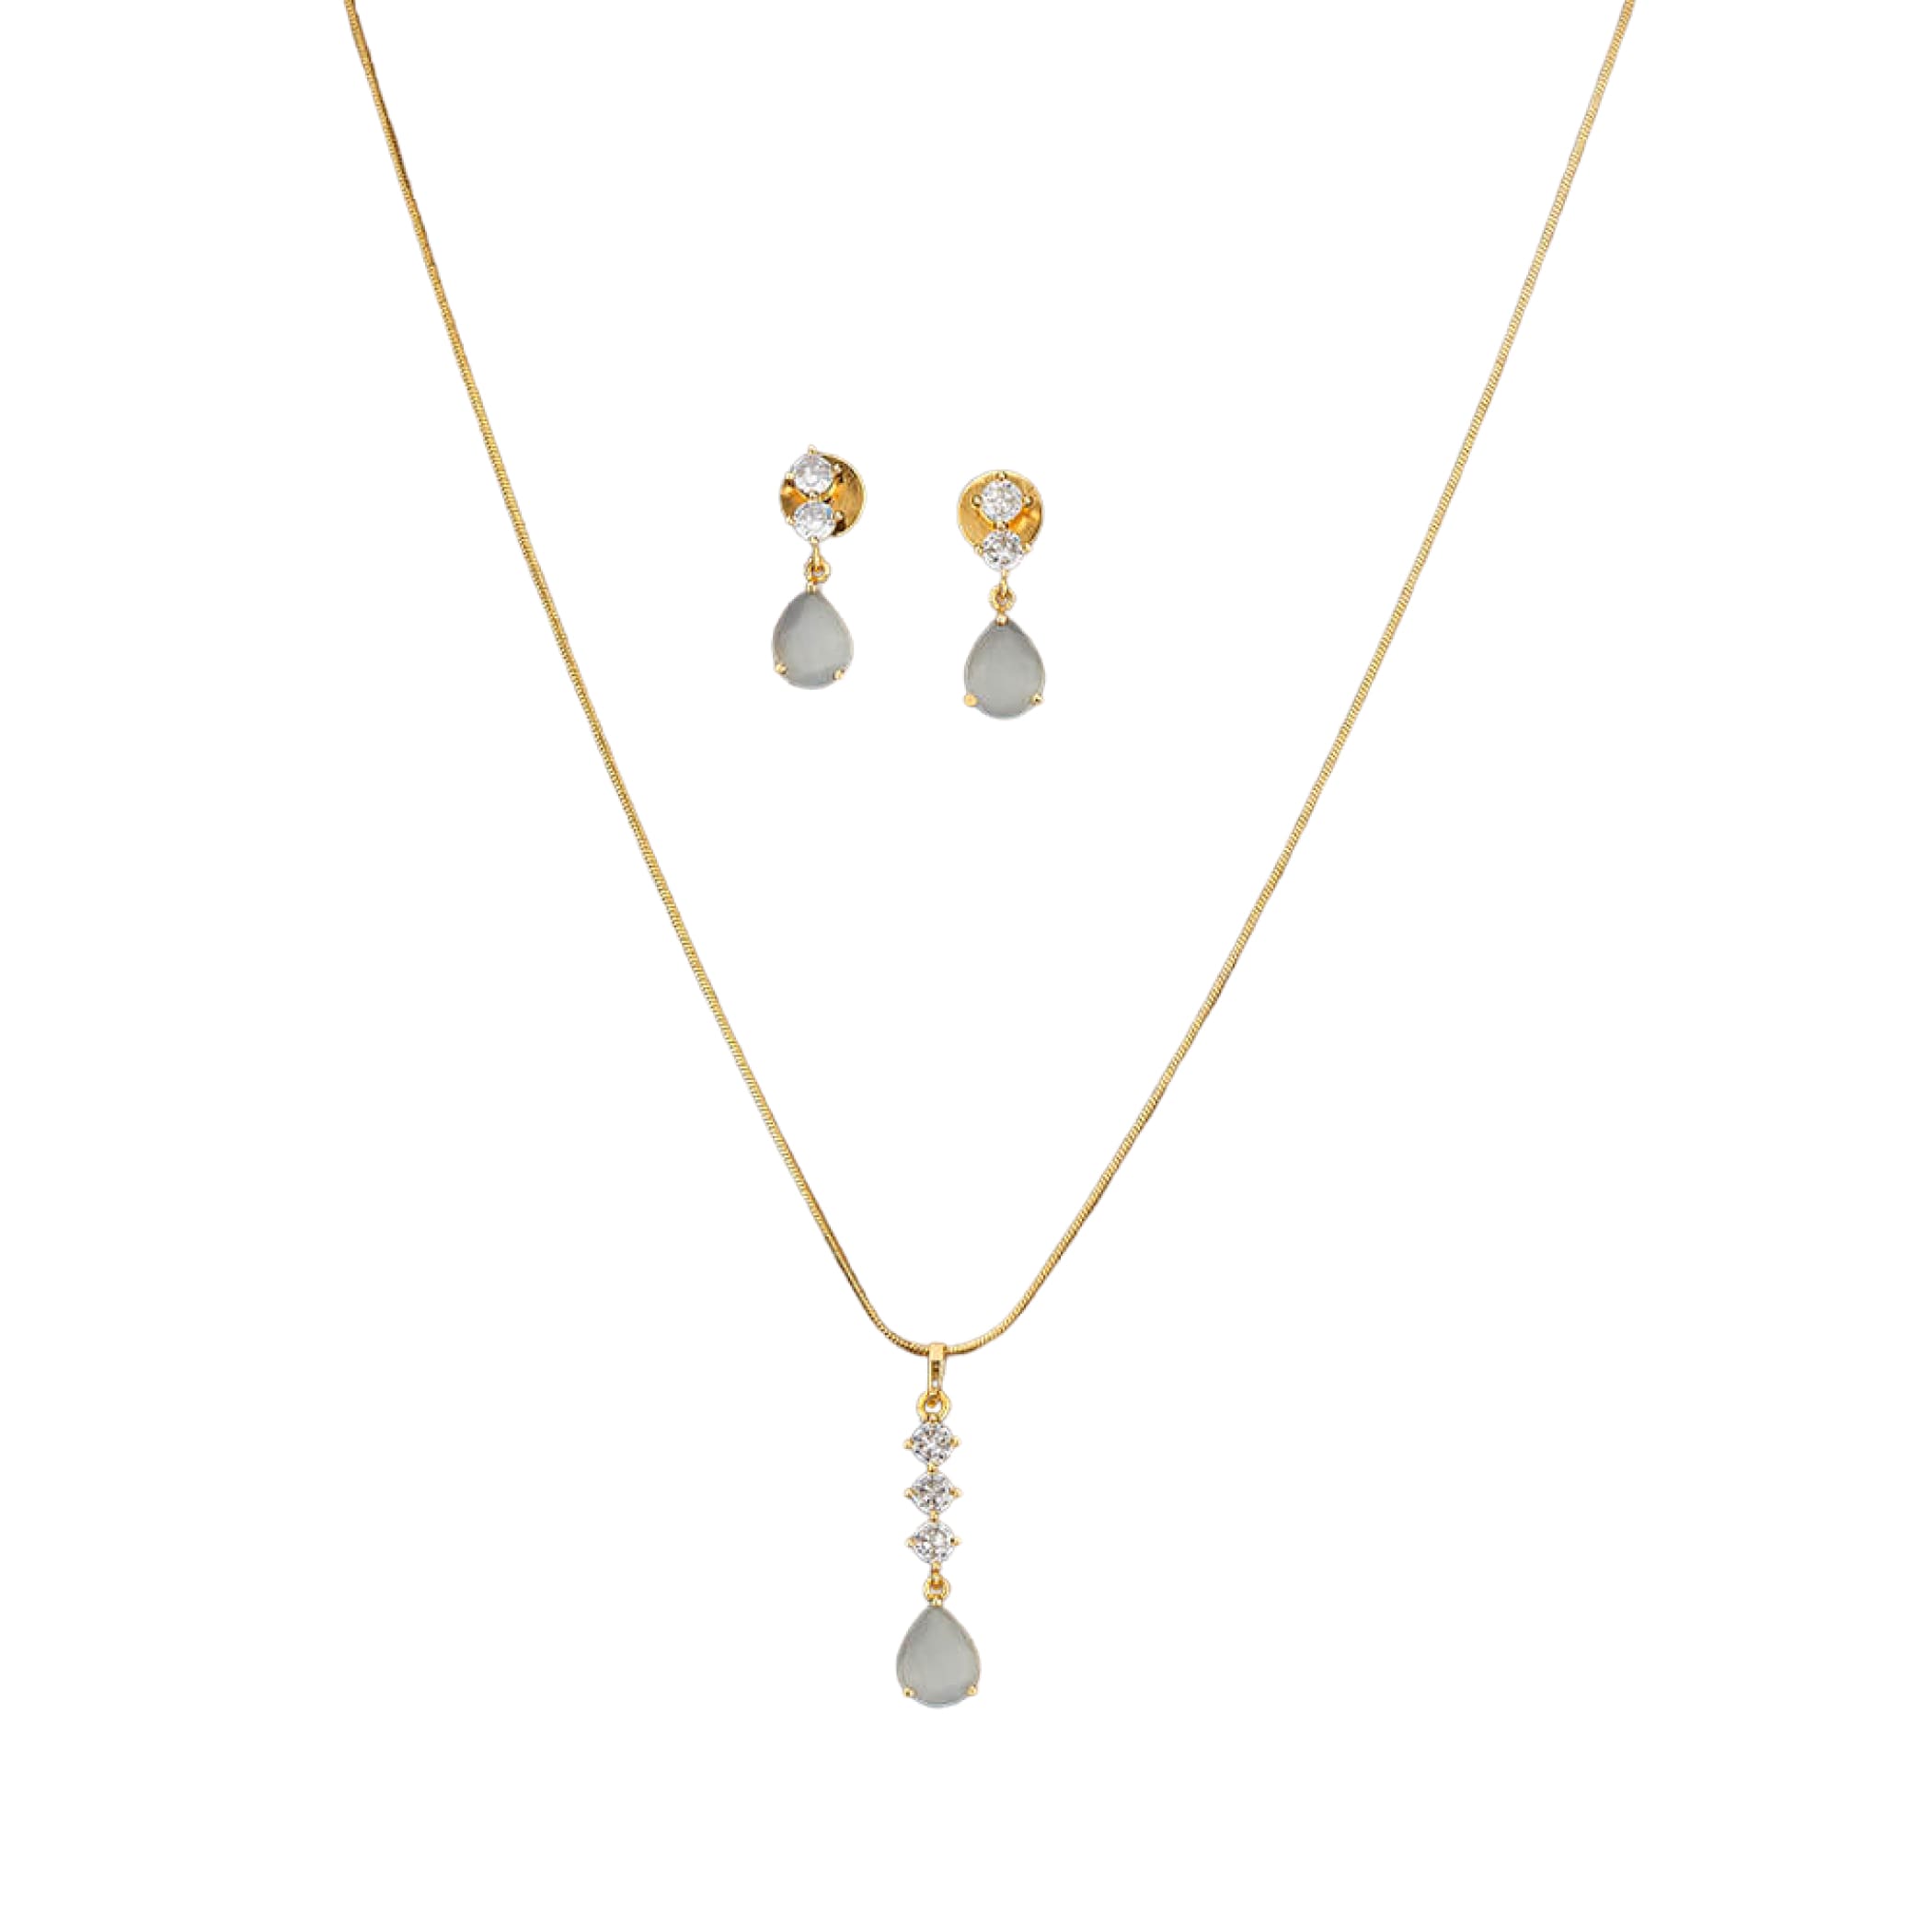 Cz classic pendant set with gold plating jewelry traditional